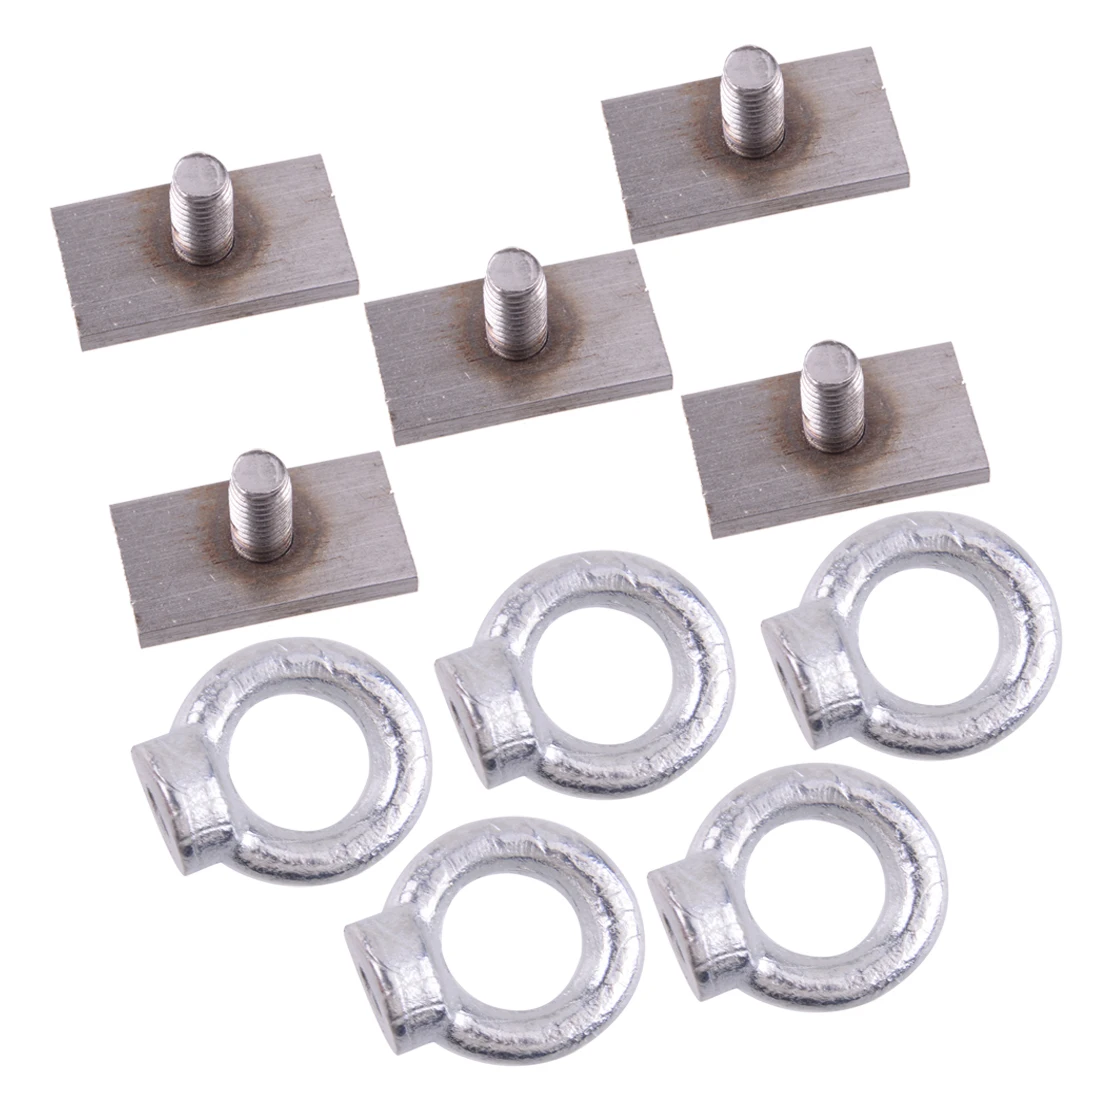 Details about   2x T Bolt Eye Nut tie down kit for Rhino Thule Yakima Pro Rola roof rack M8 16mm 